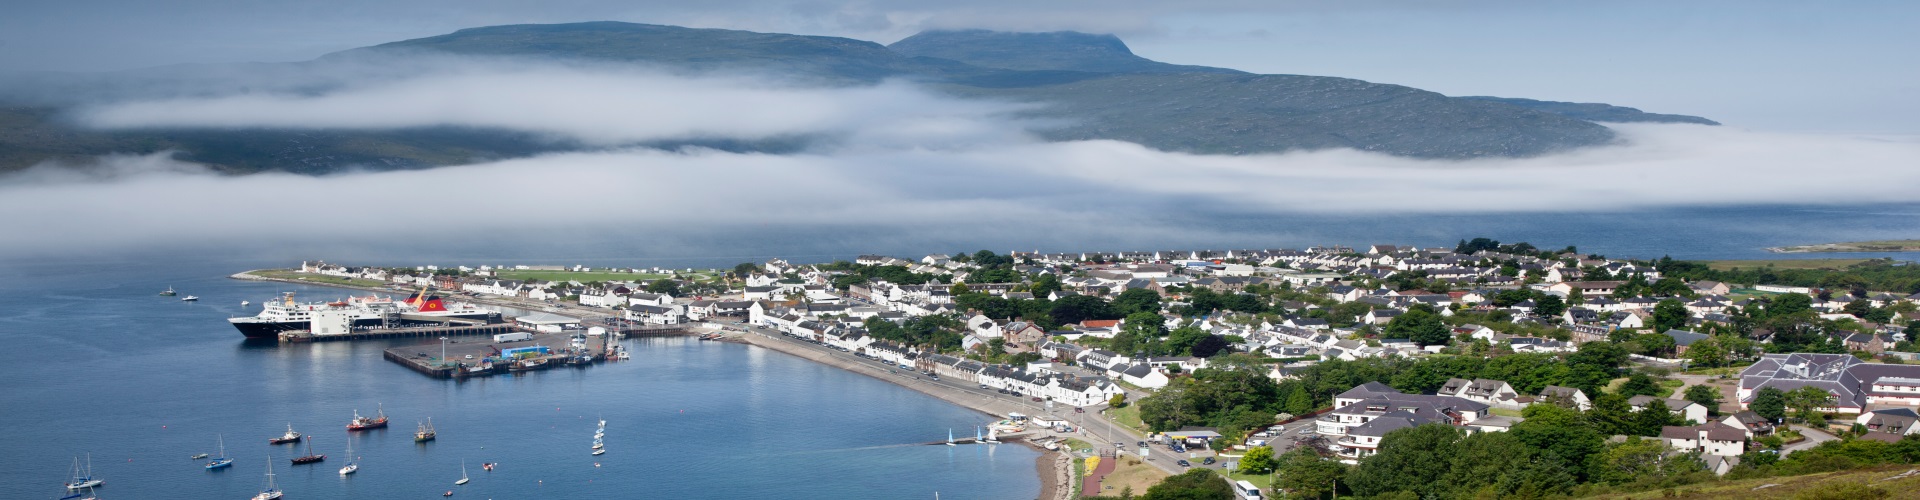 self catering apartment for two ullapool scotland rubha mor